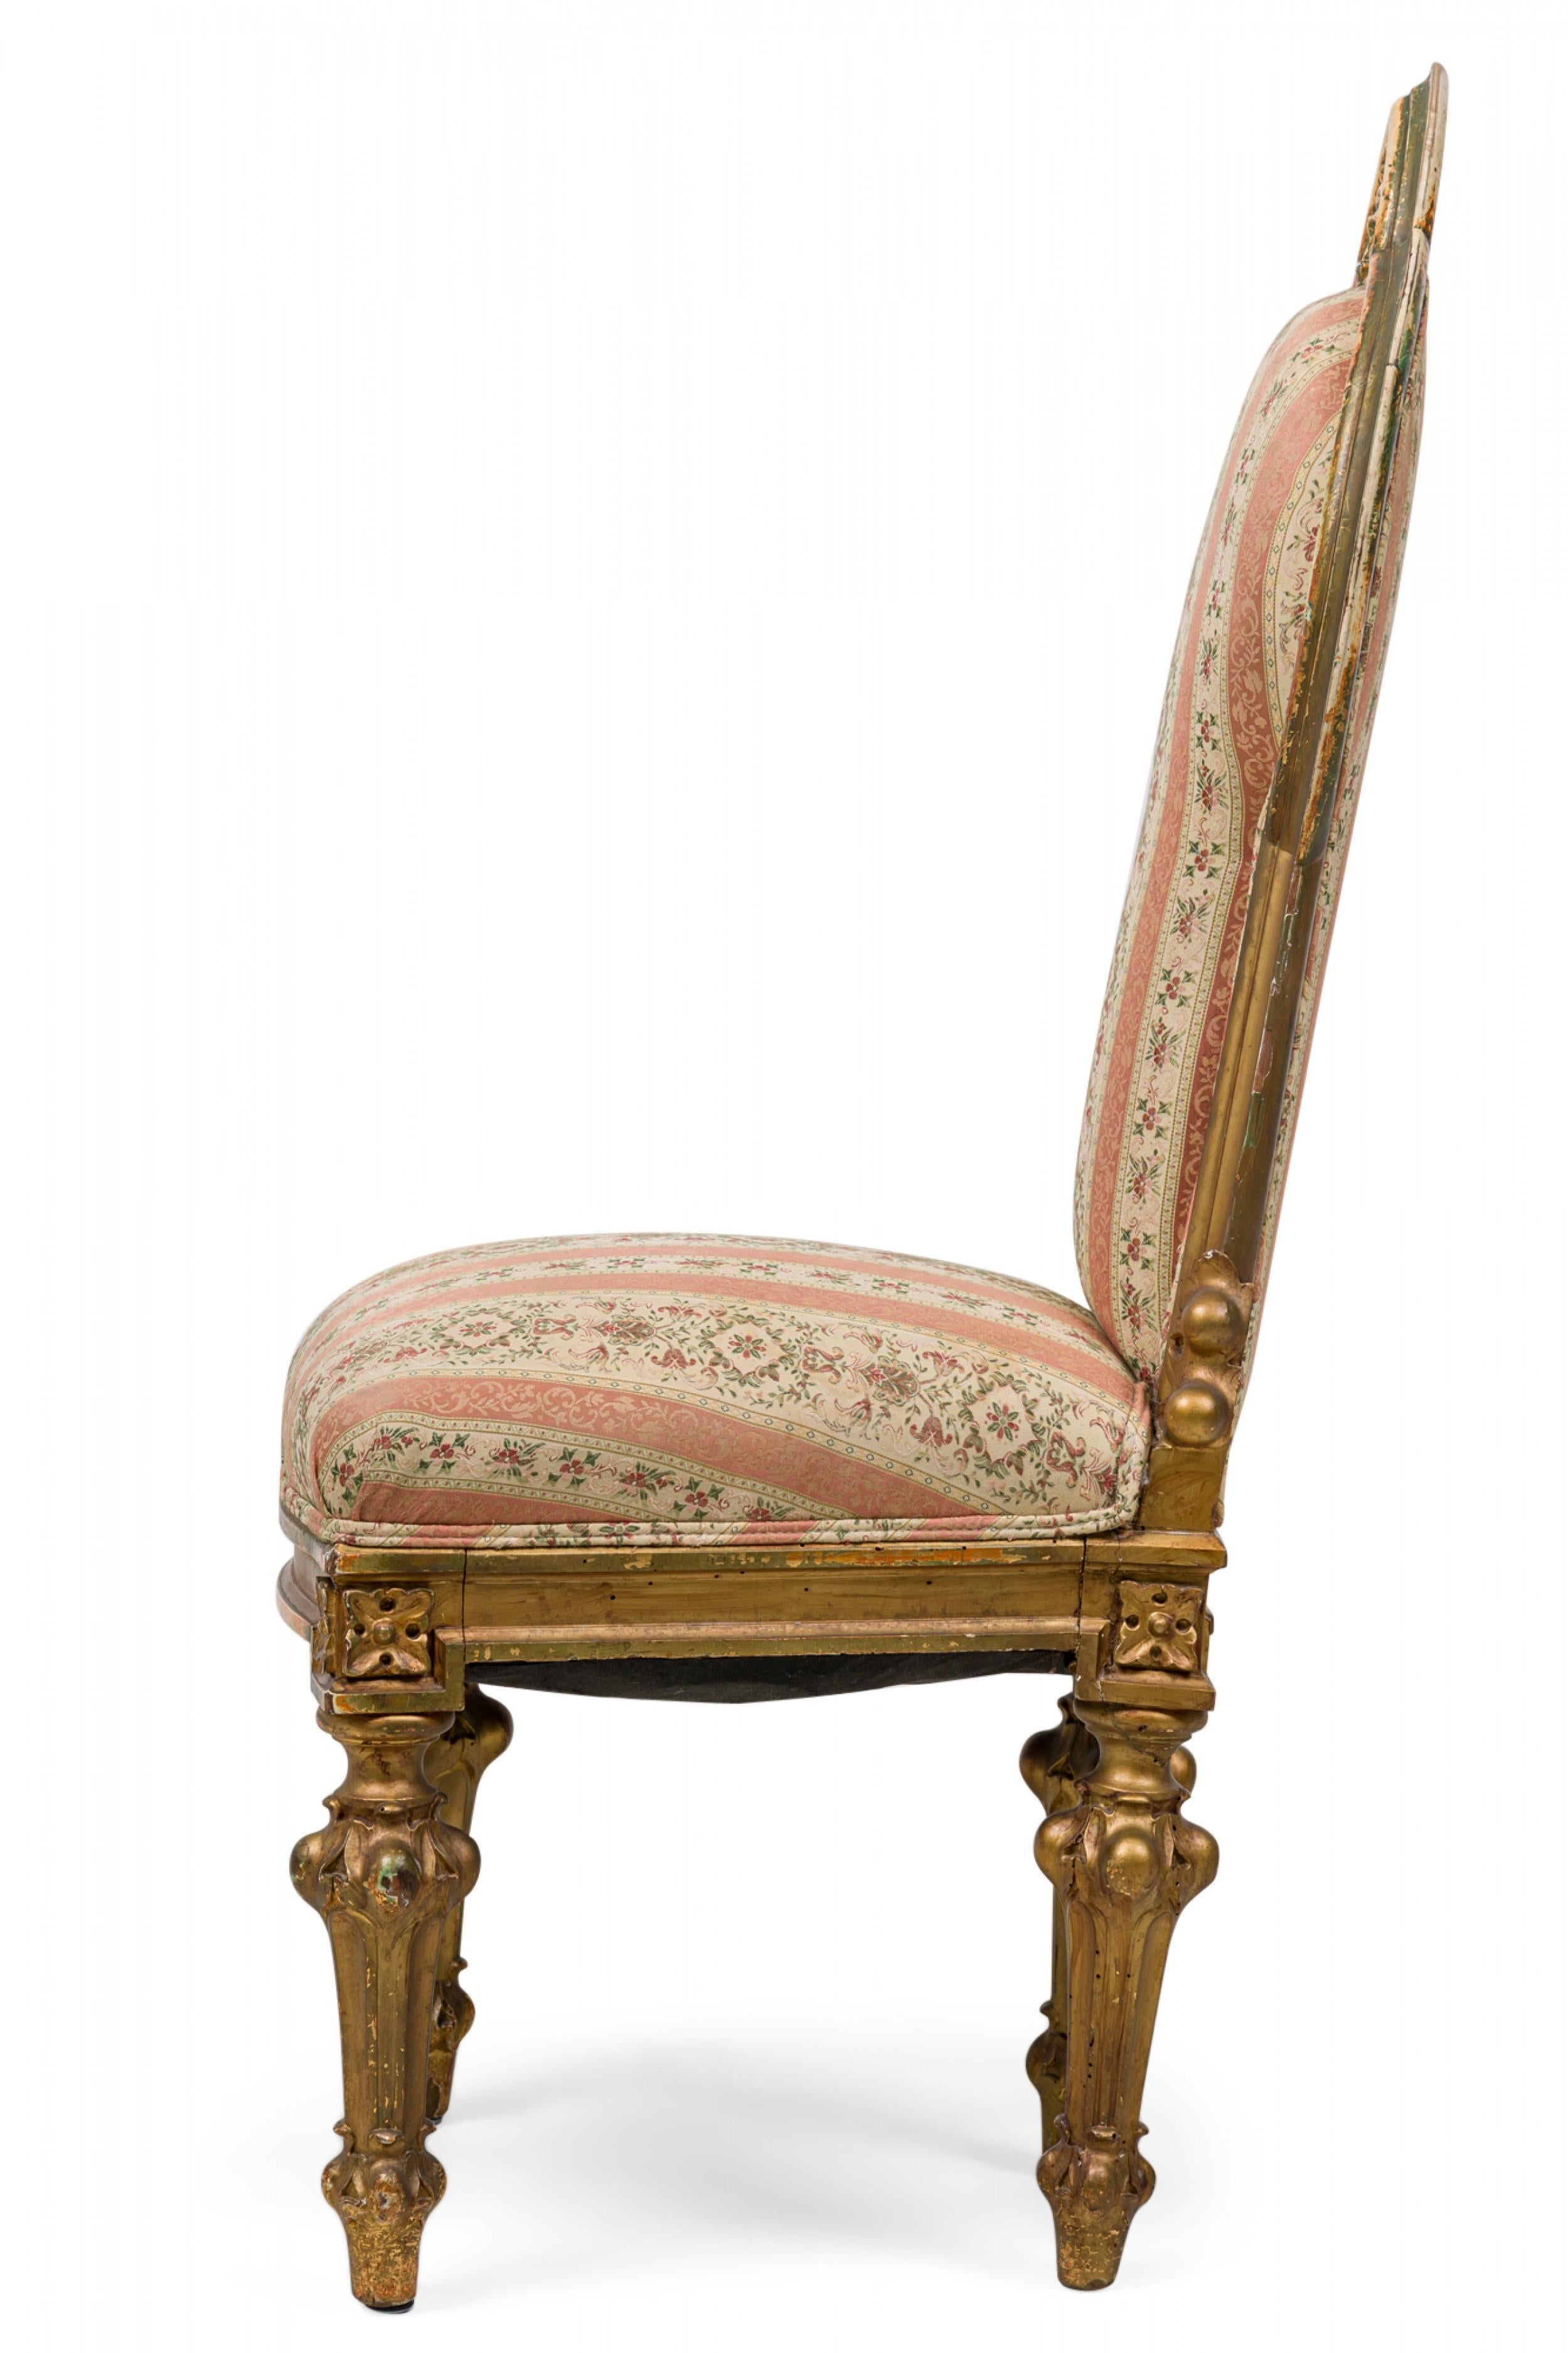 Neoclassical Italian Neoclassic Giltwood & Stripe Upholstered Dining / Side Chair For Sale